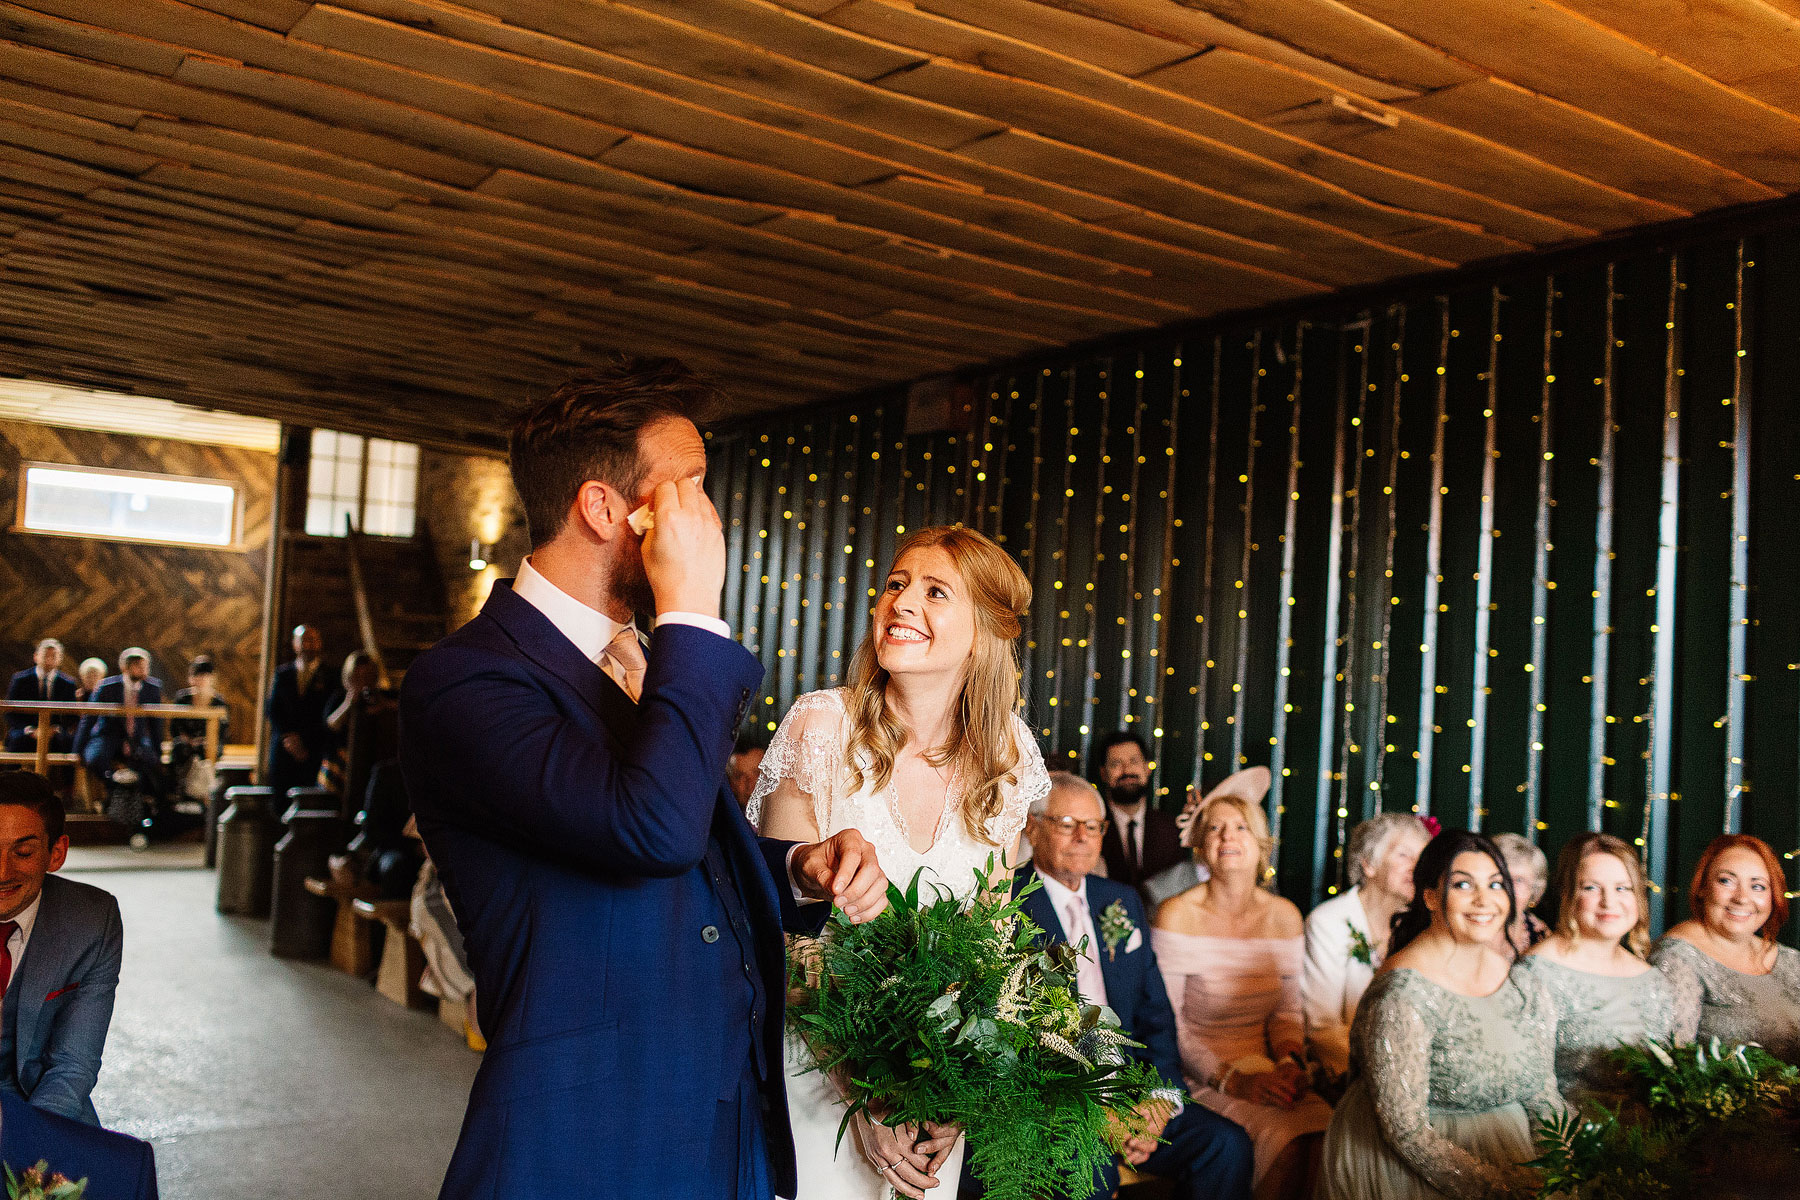 getting married in a barn